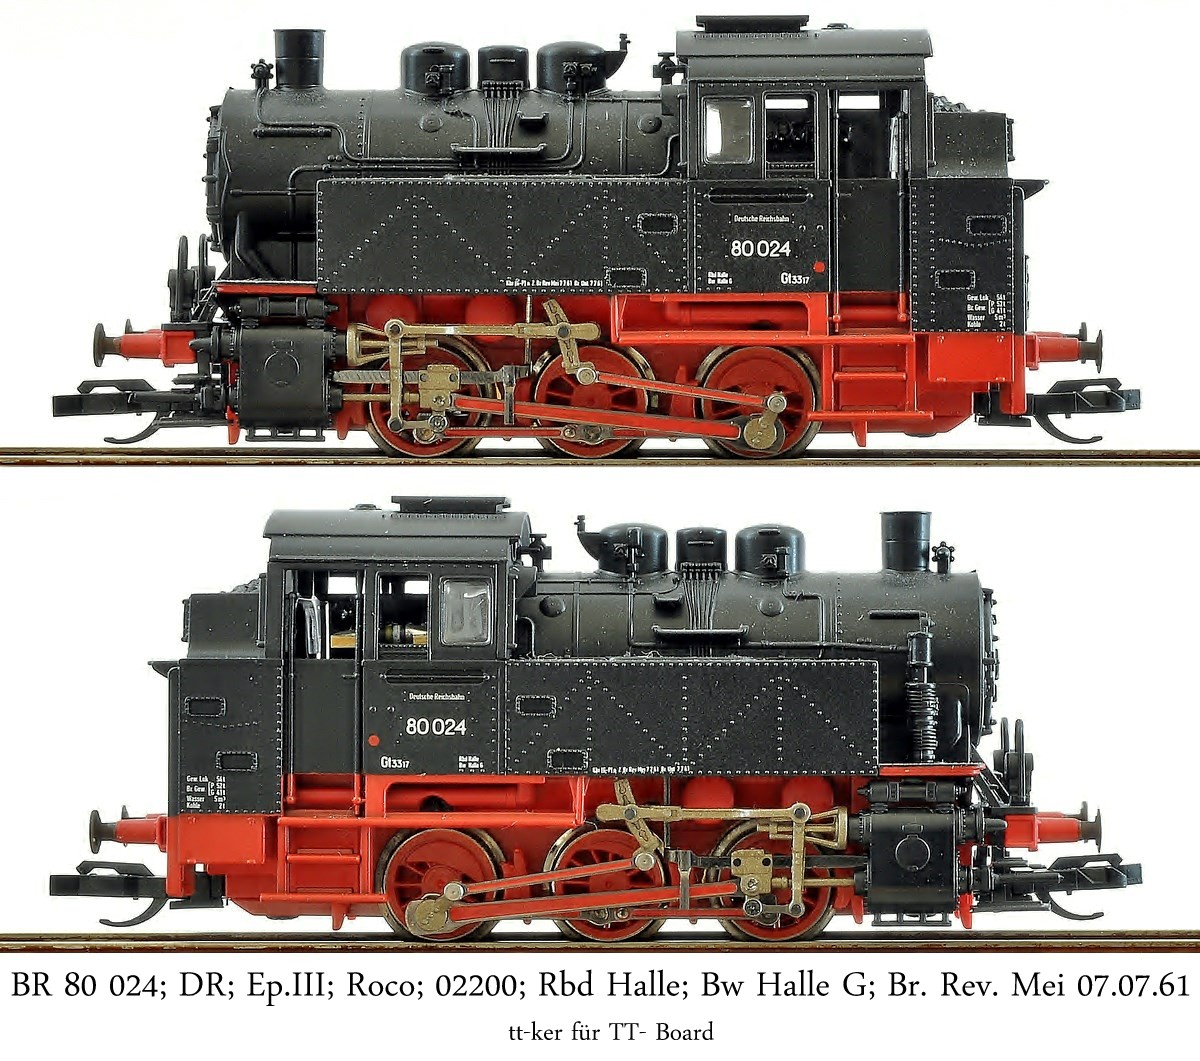 BR 80 024; DR; Ep.III; Roco; 02200; Rbd Halle; Bw Halle G; Br. Rev. 07.07.61